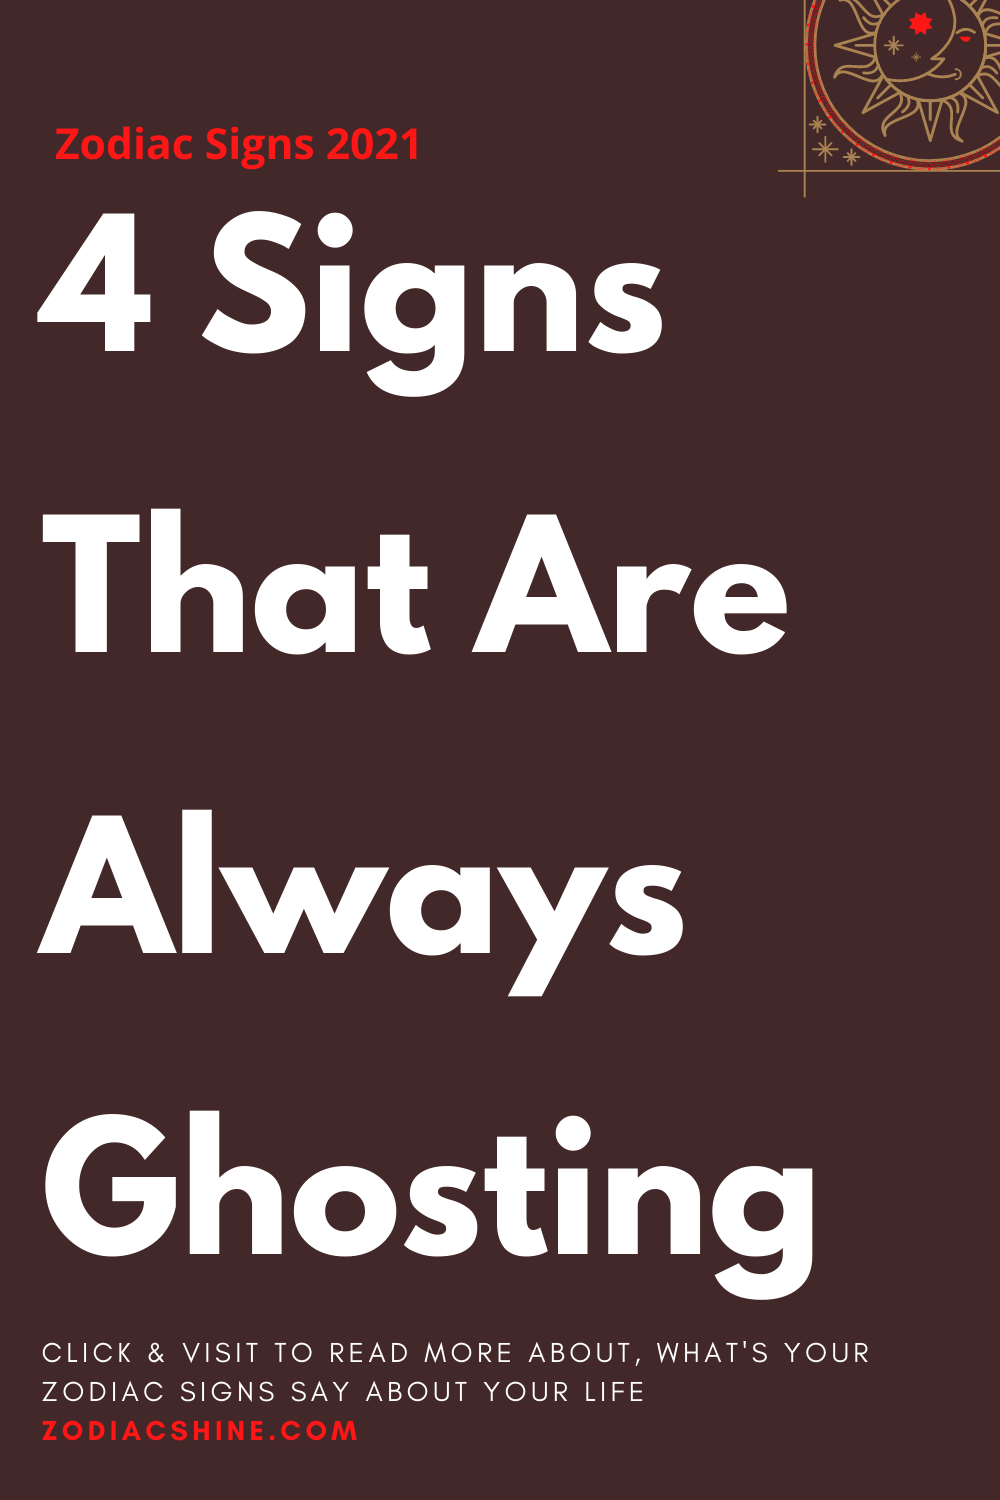 4 Signs That Are Always Ghosting